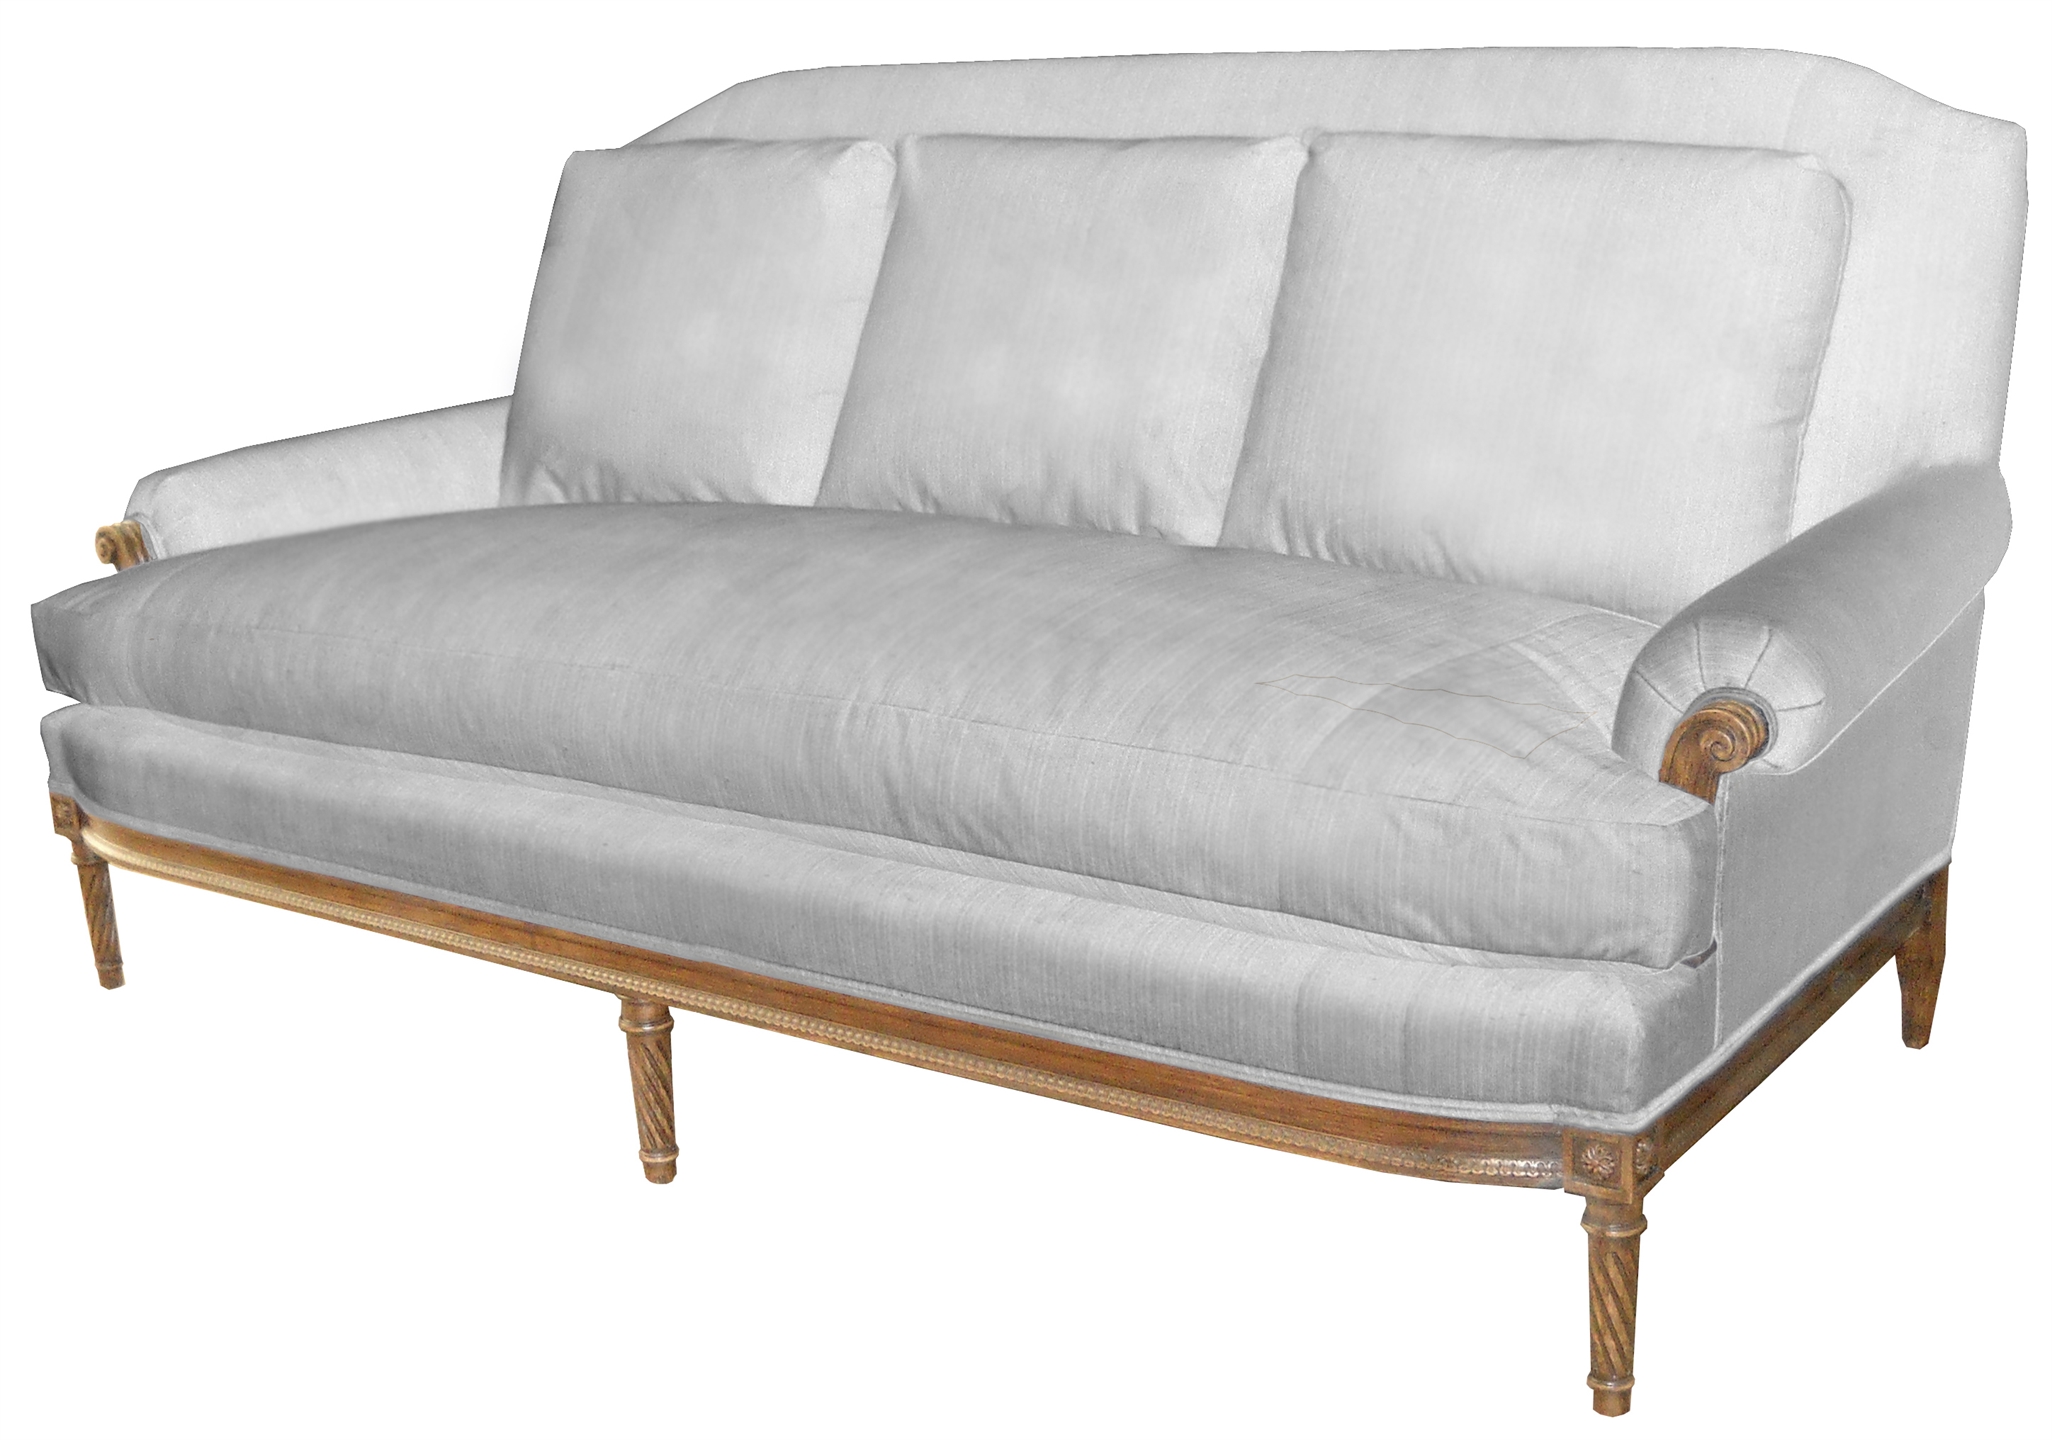 LORRAINE SOFA WITH LOOSE BACK PILLOWS